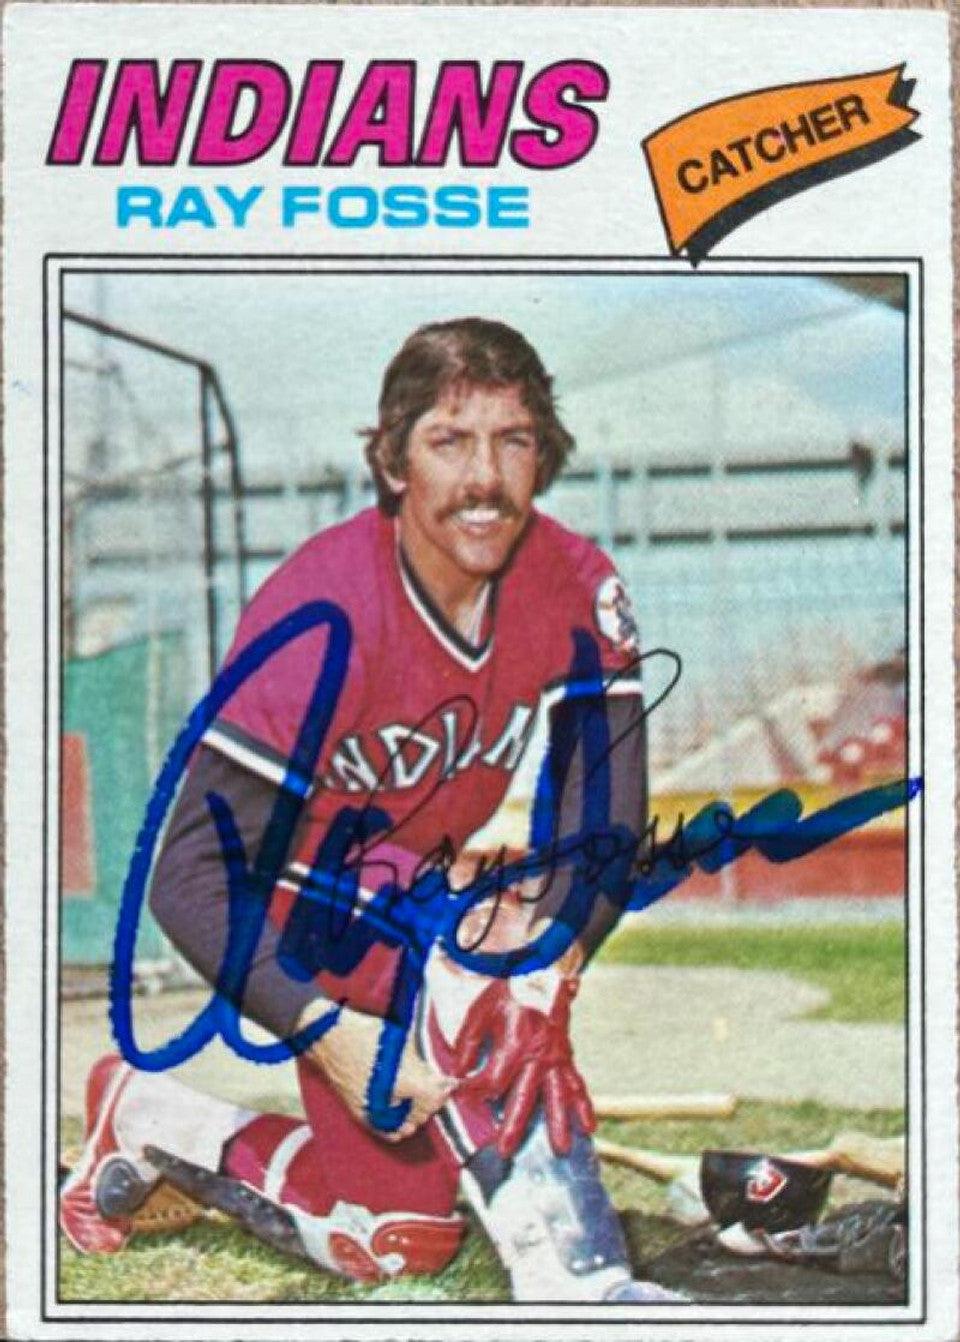 Ray Fosse Signed 1977 Topps Baseball Card - Cleveland Indians - PastPros